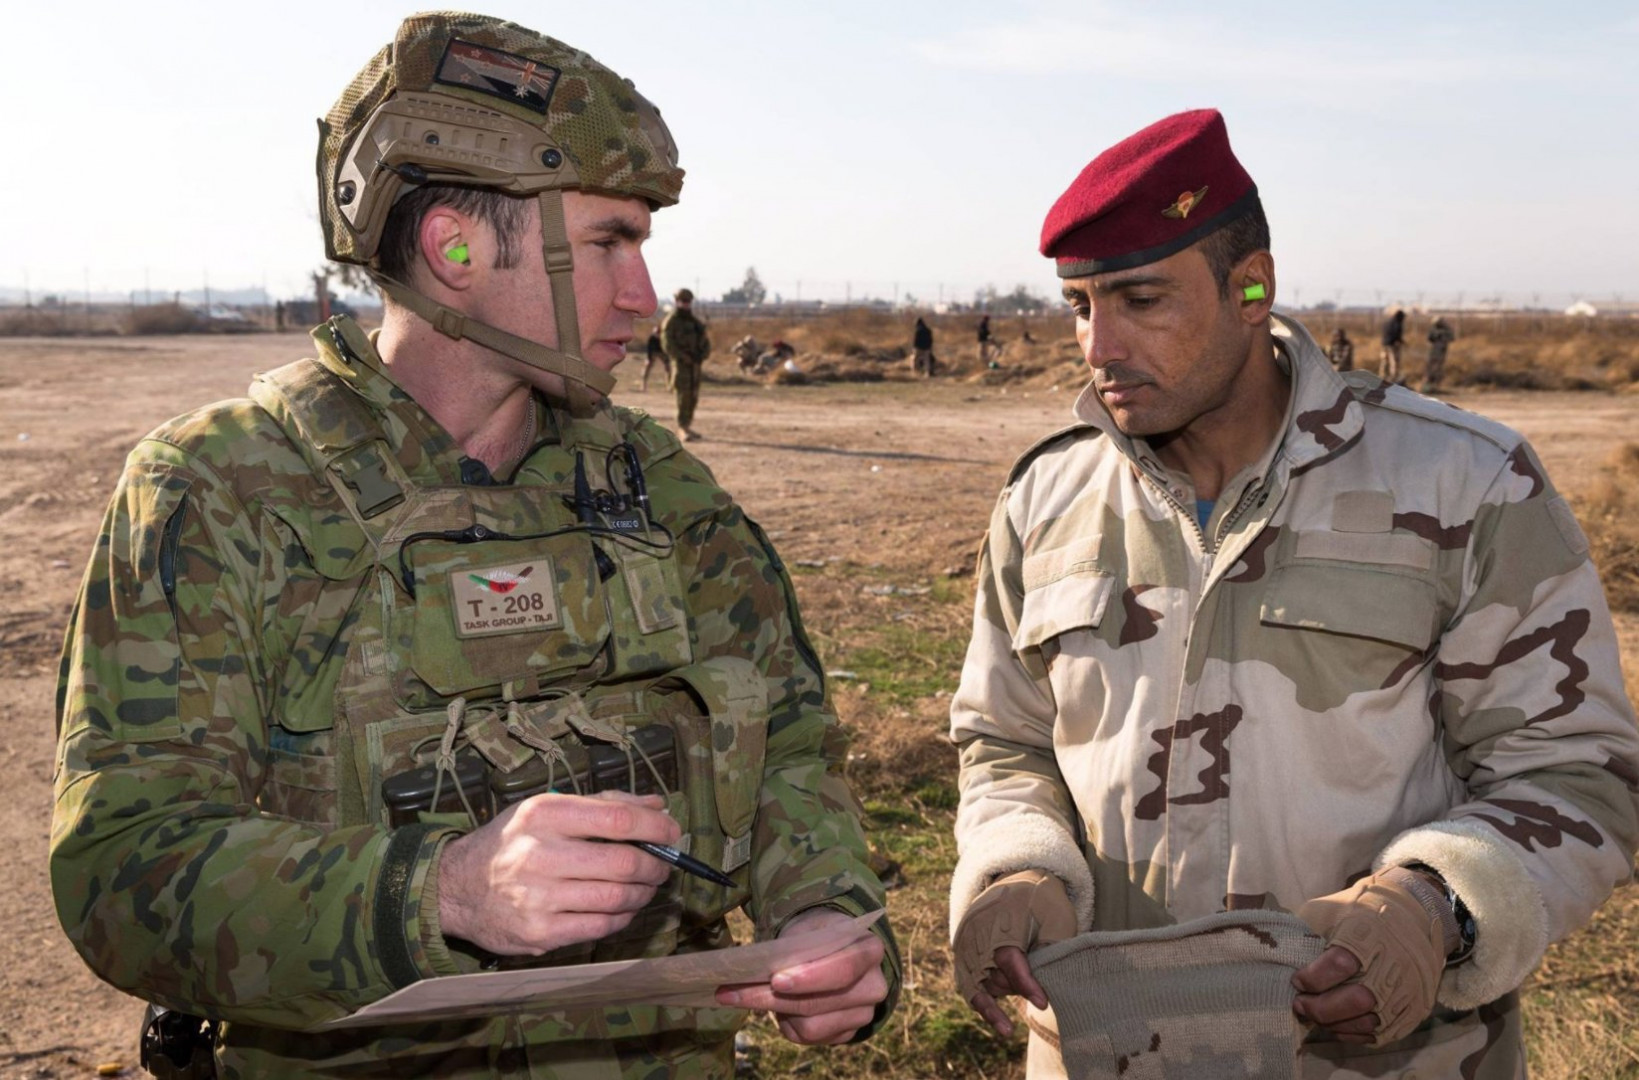 Iraqis who helped ADF fight Islamic State say they have been abandoned by Australia